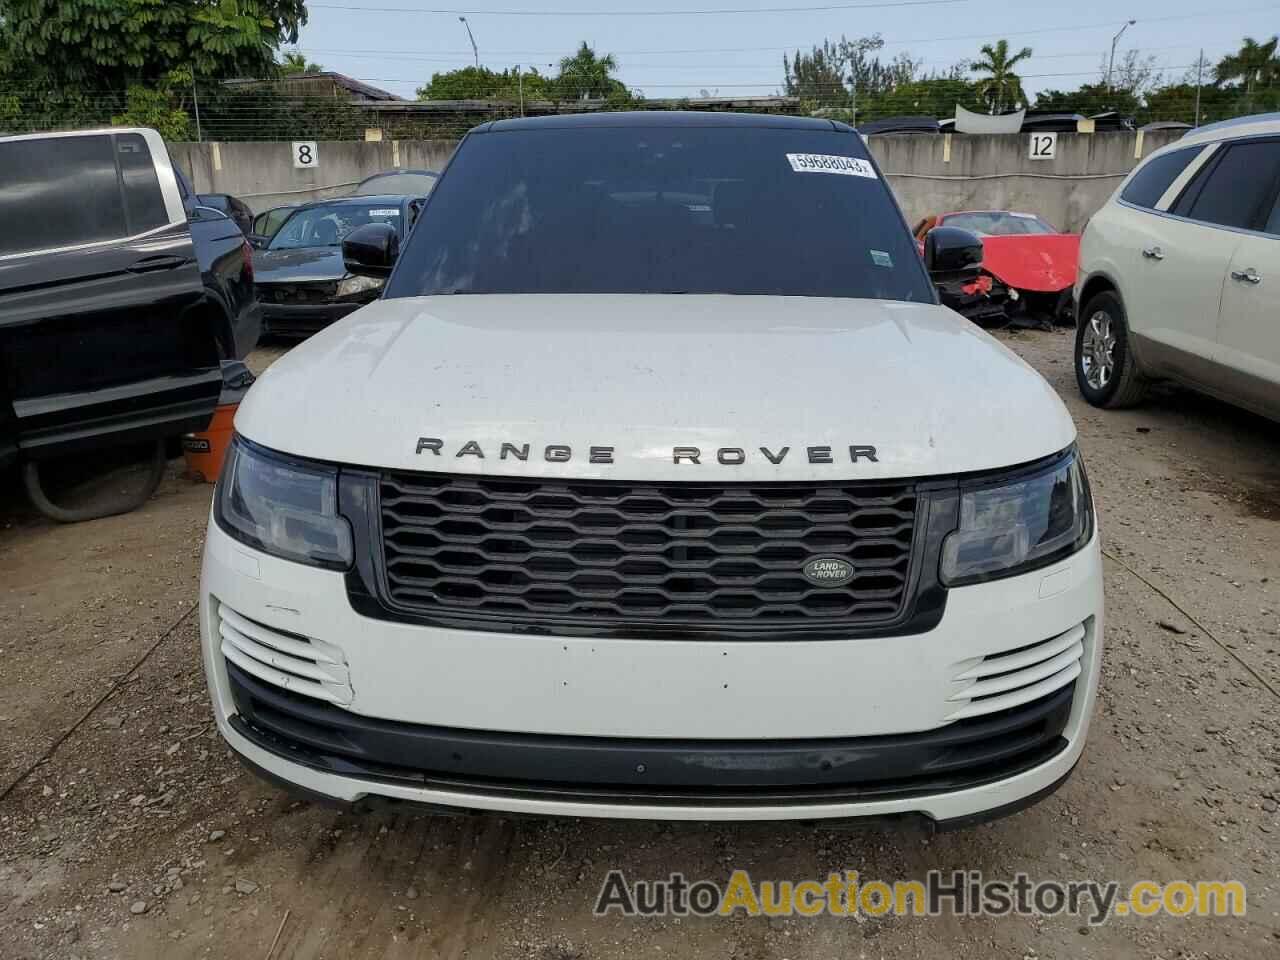 LAND ROVER RANGEROVER SUPERCHARGED, SALGS2REXJA396283